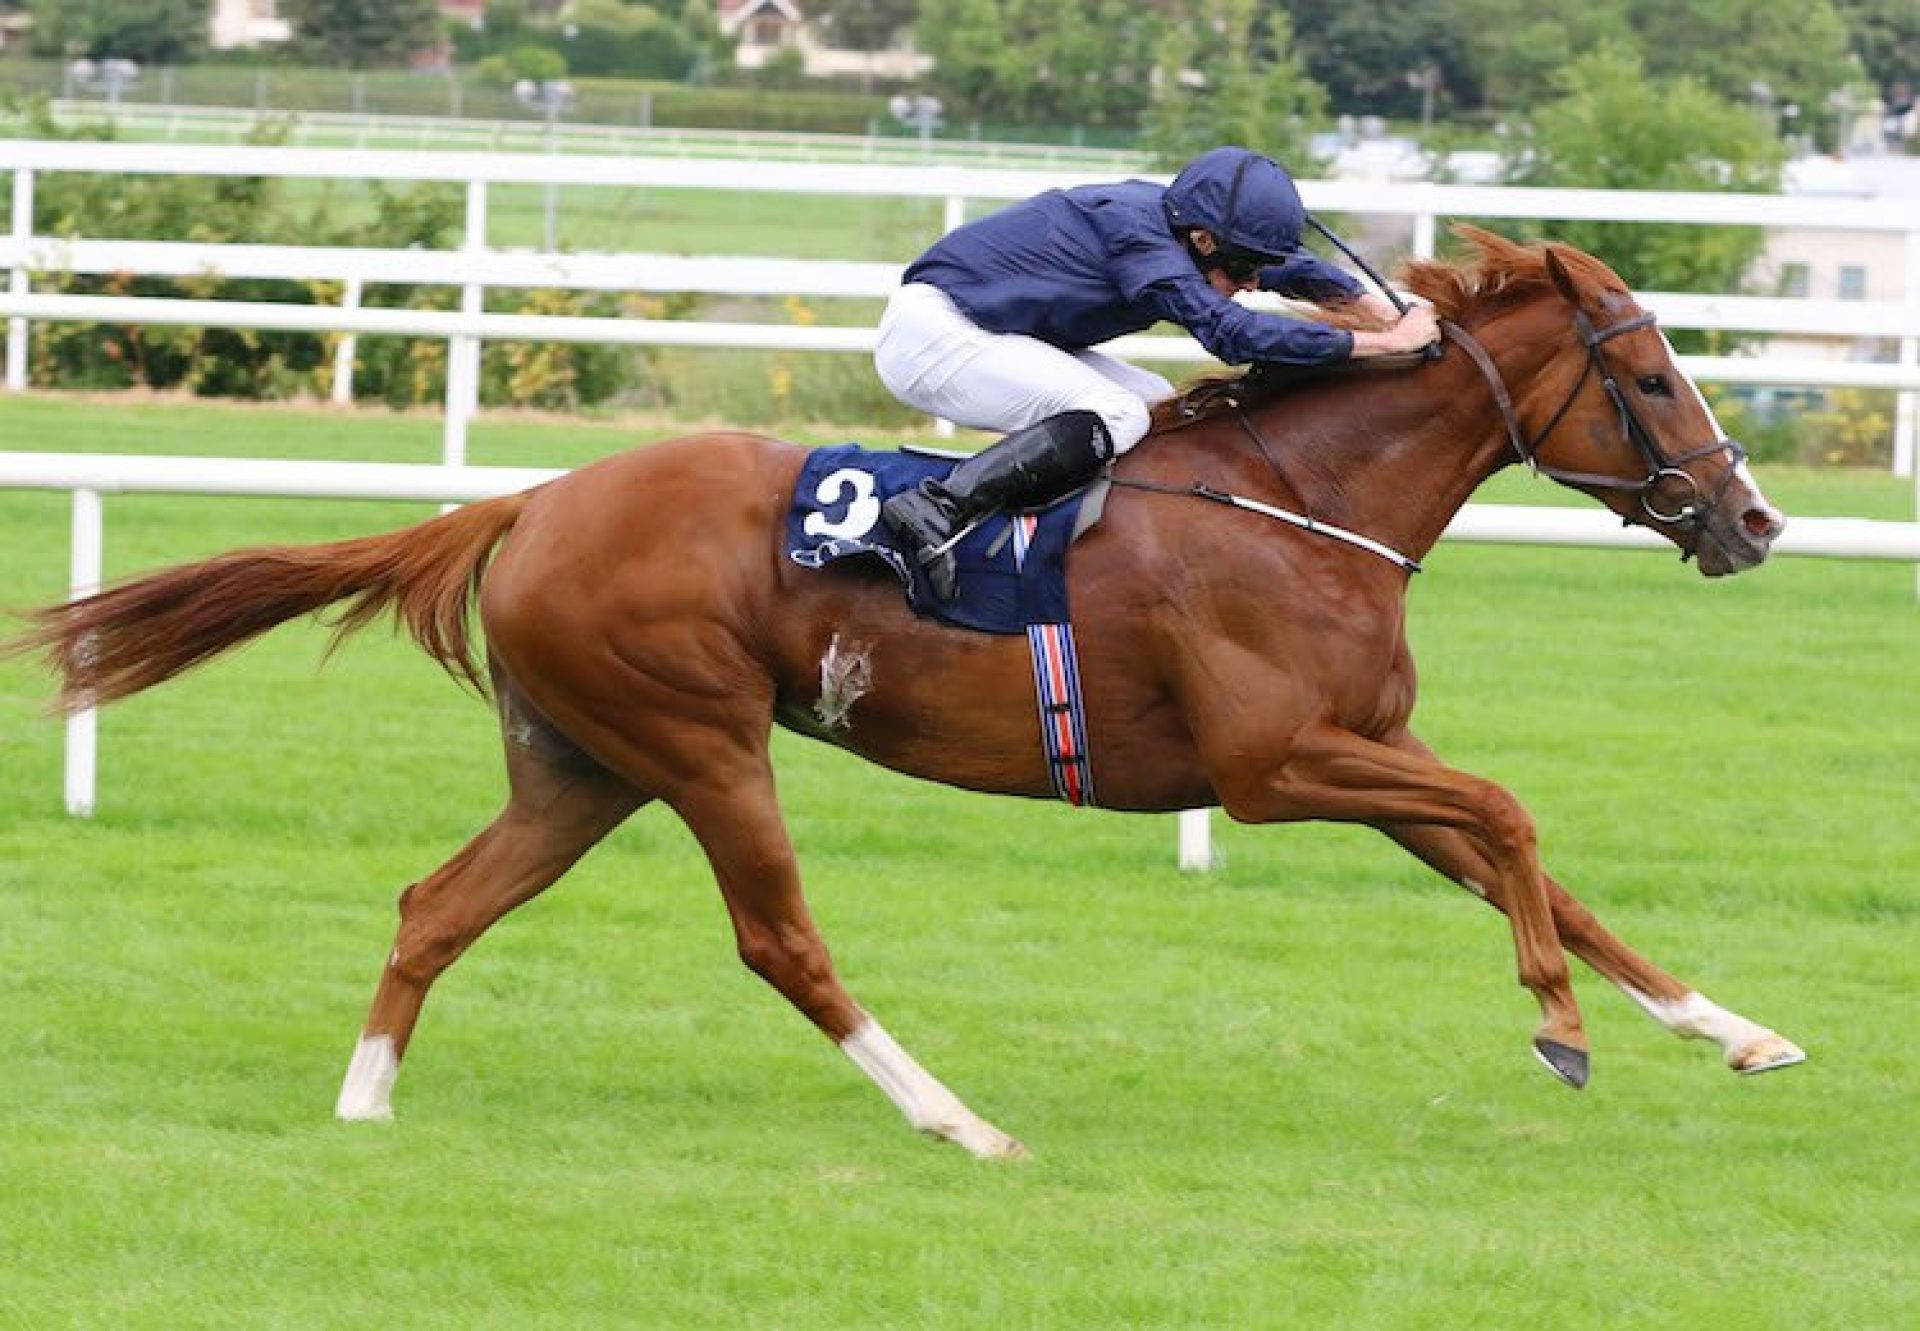 Alice Springs (Galileo) winning the G1 Matron Stakes at Leopardstown